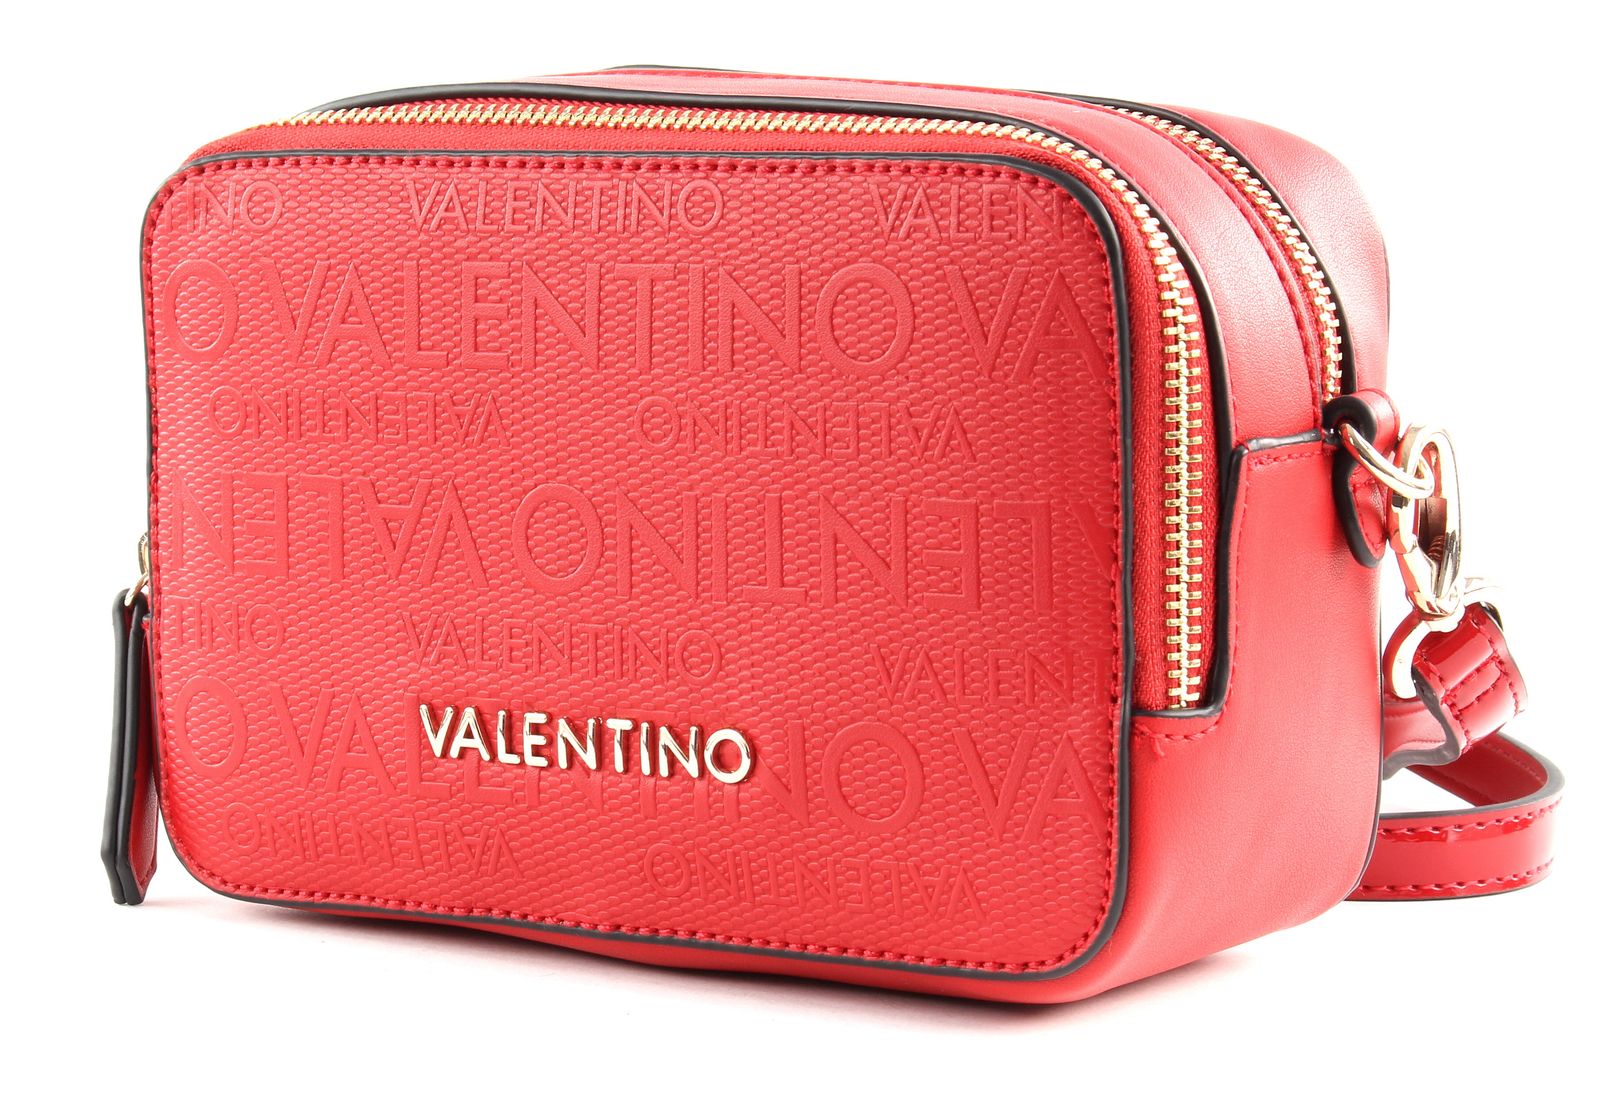 VALENTINO Lady Crossover Bag | Buy bags, purses & accessories online ...